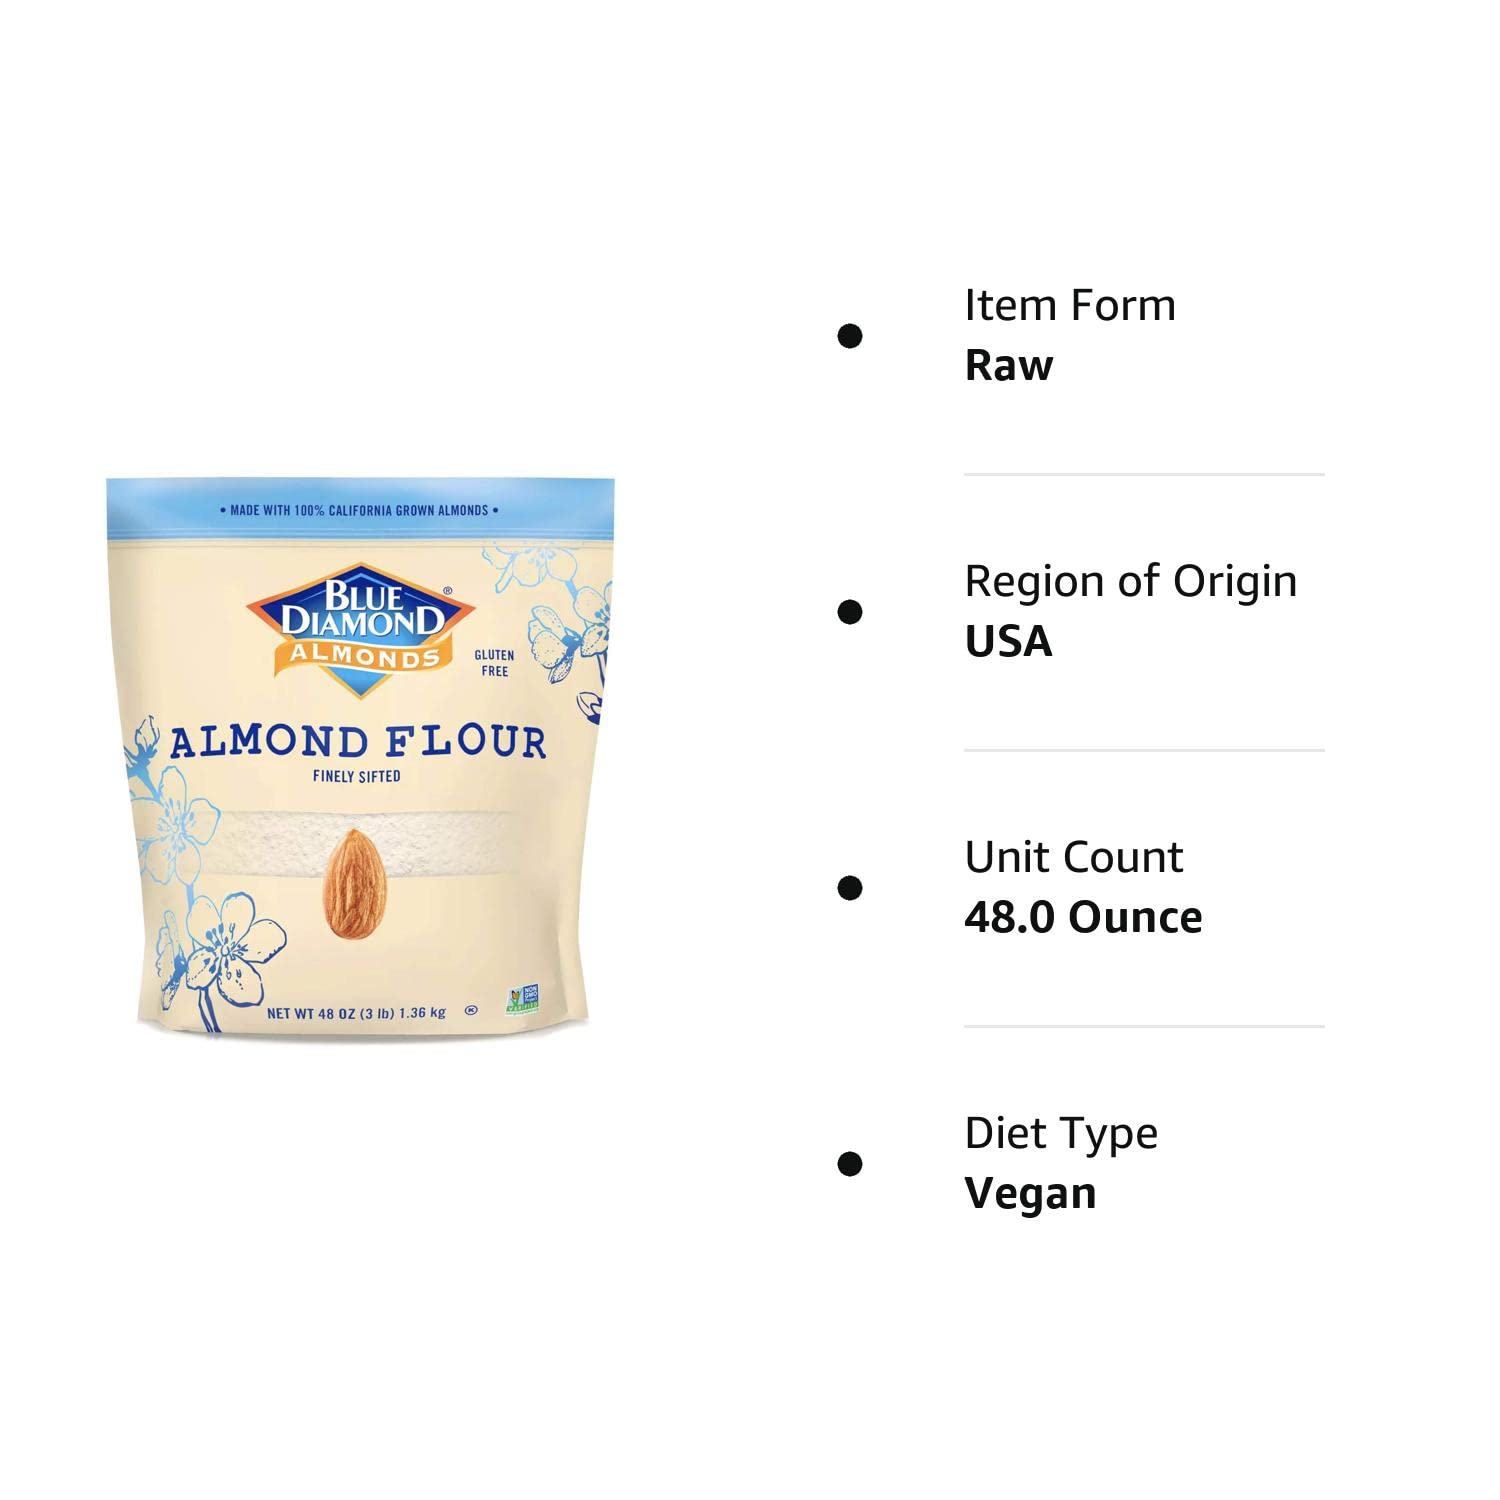 Blue Diamond Almonds Almond Flour Finely Sifted